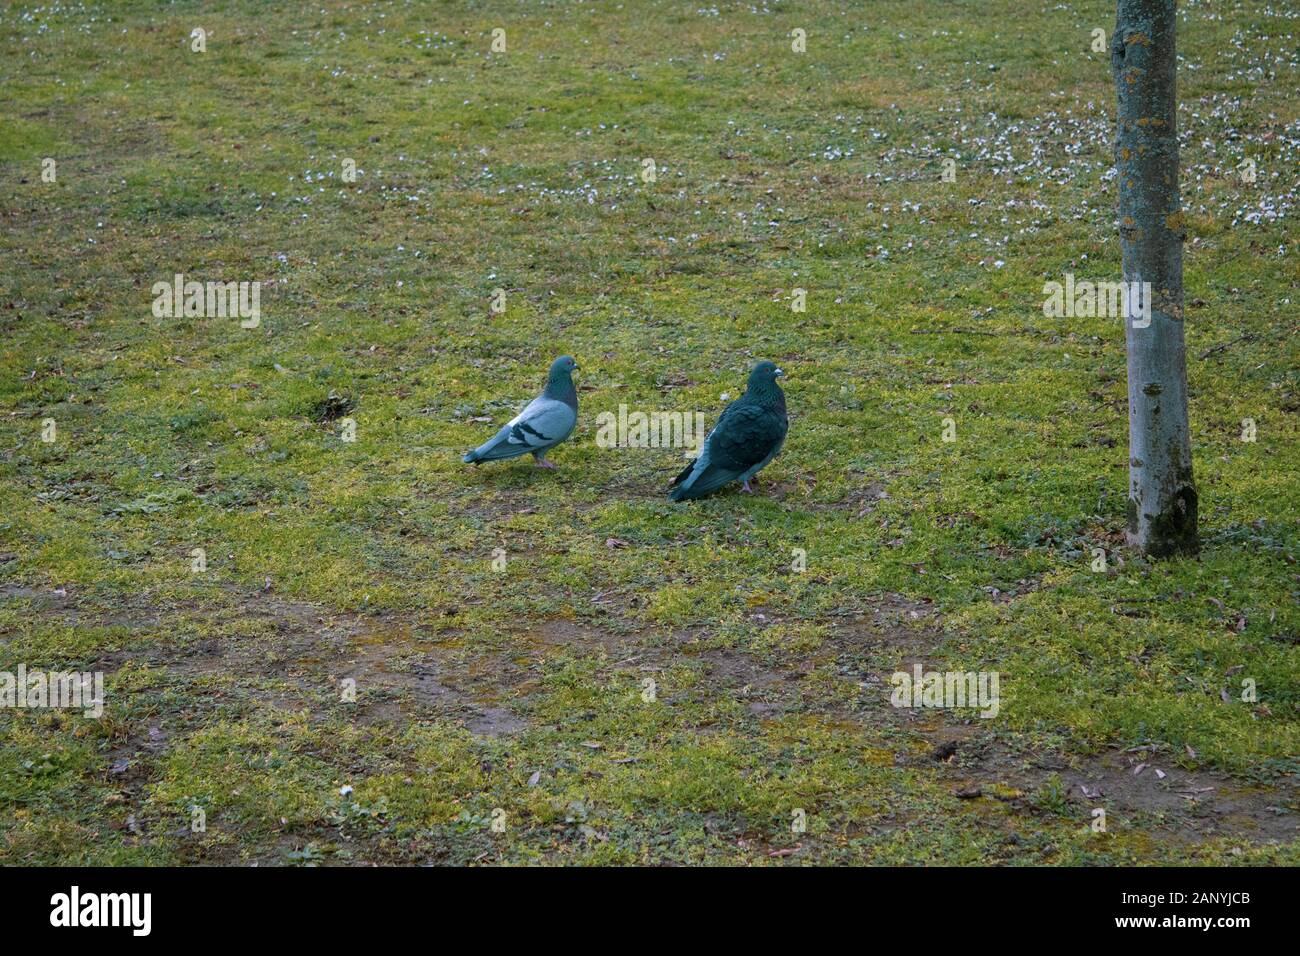 two pigeons on a field in a park Stock Photo